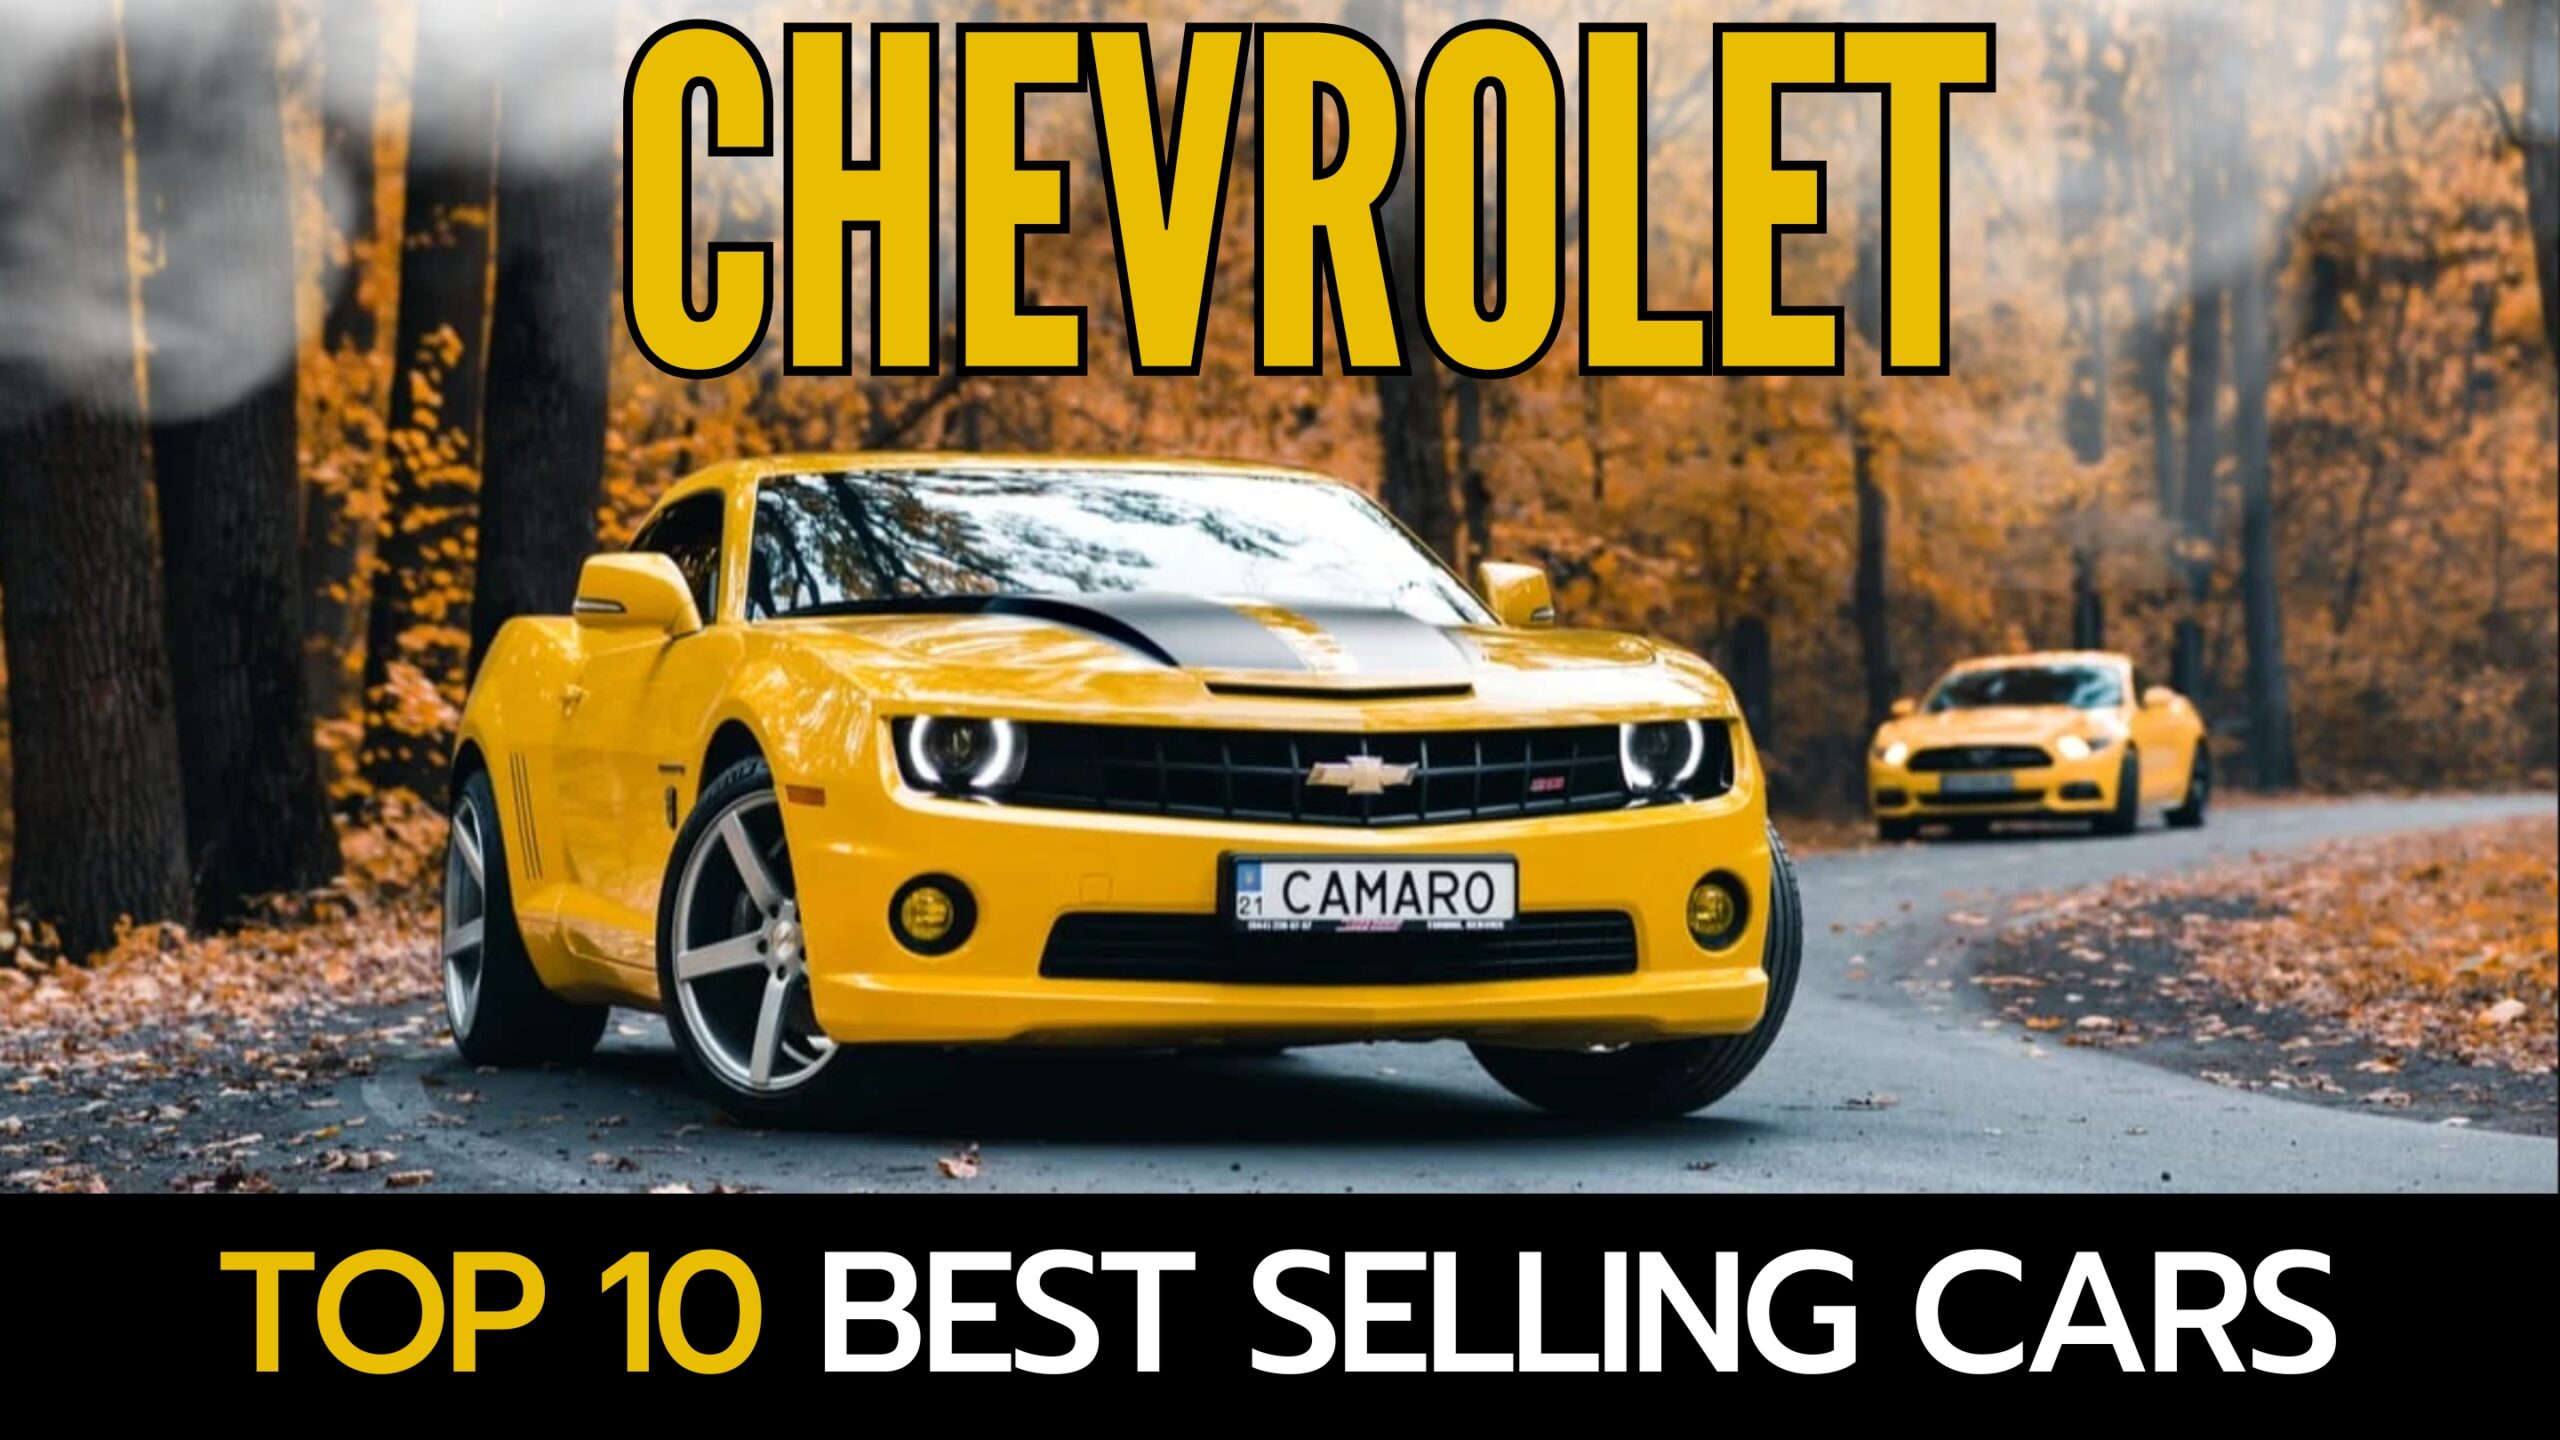 chevrolet Top 10 Best Selling Cars